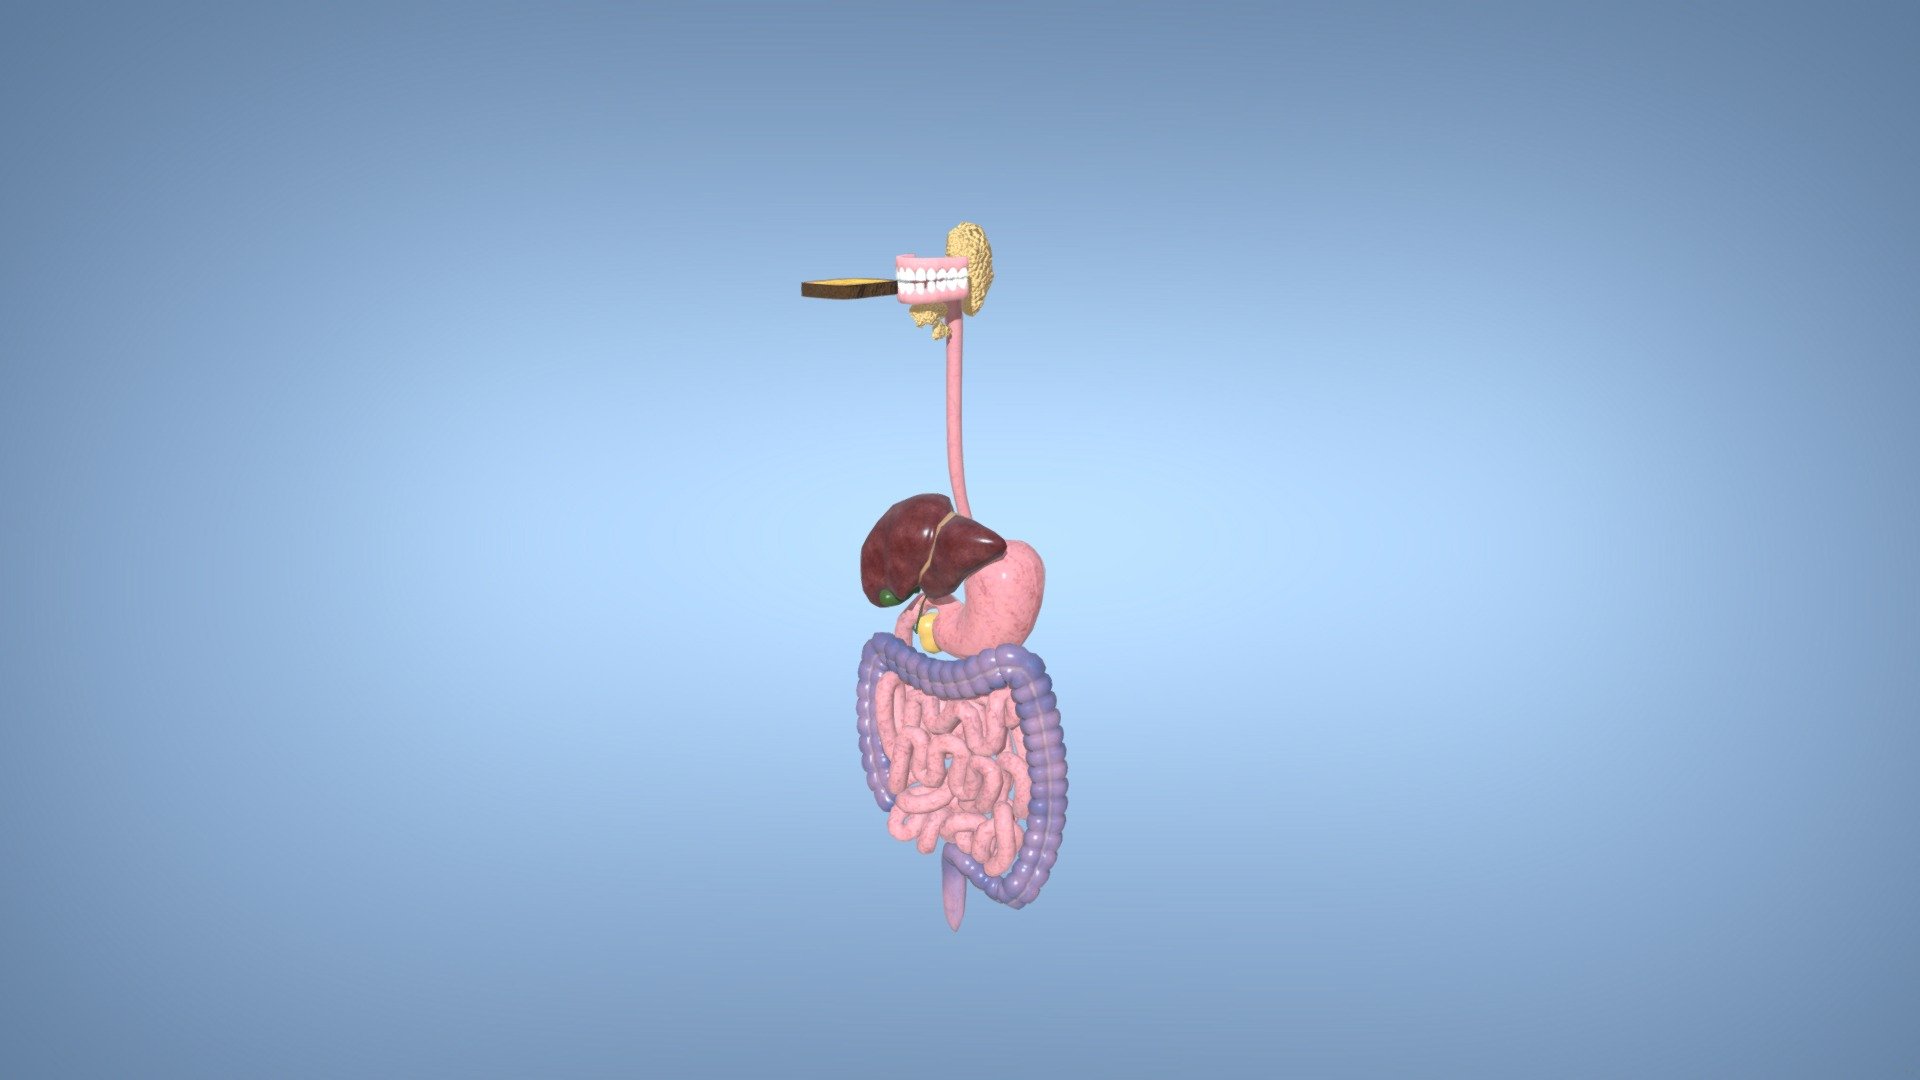 We made this digestive system for mobile AR some years ago.
The animation takes you through the digestive system step by step, showing how food gets broken down and absorbed by the body 3d model